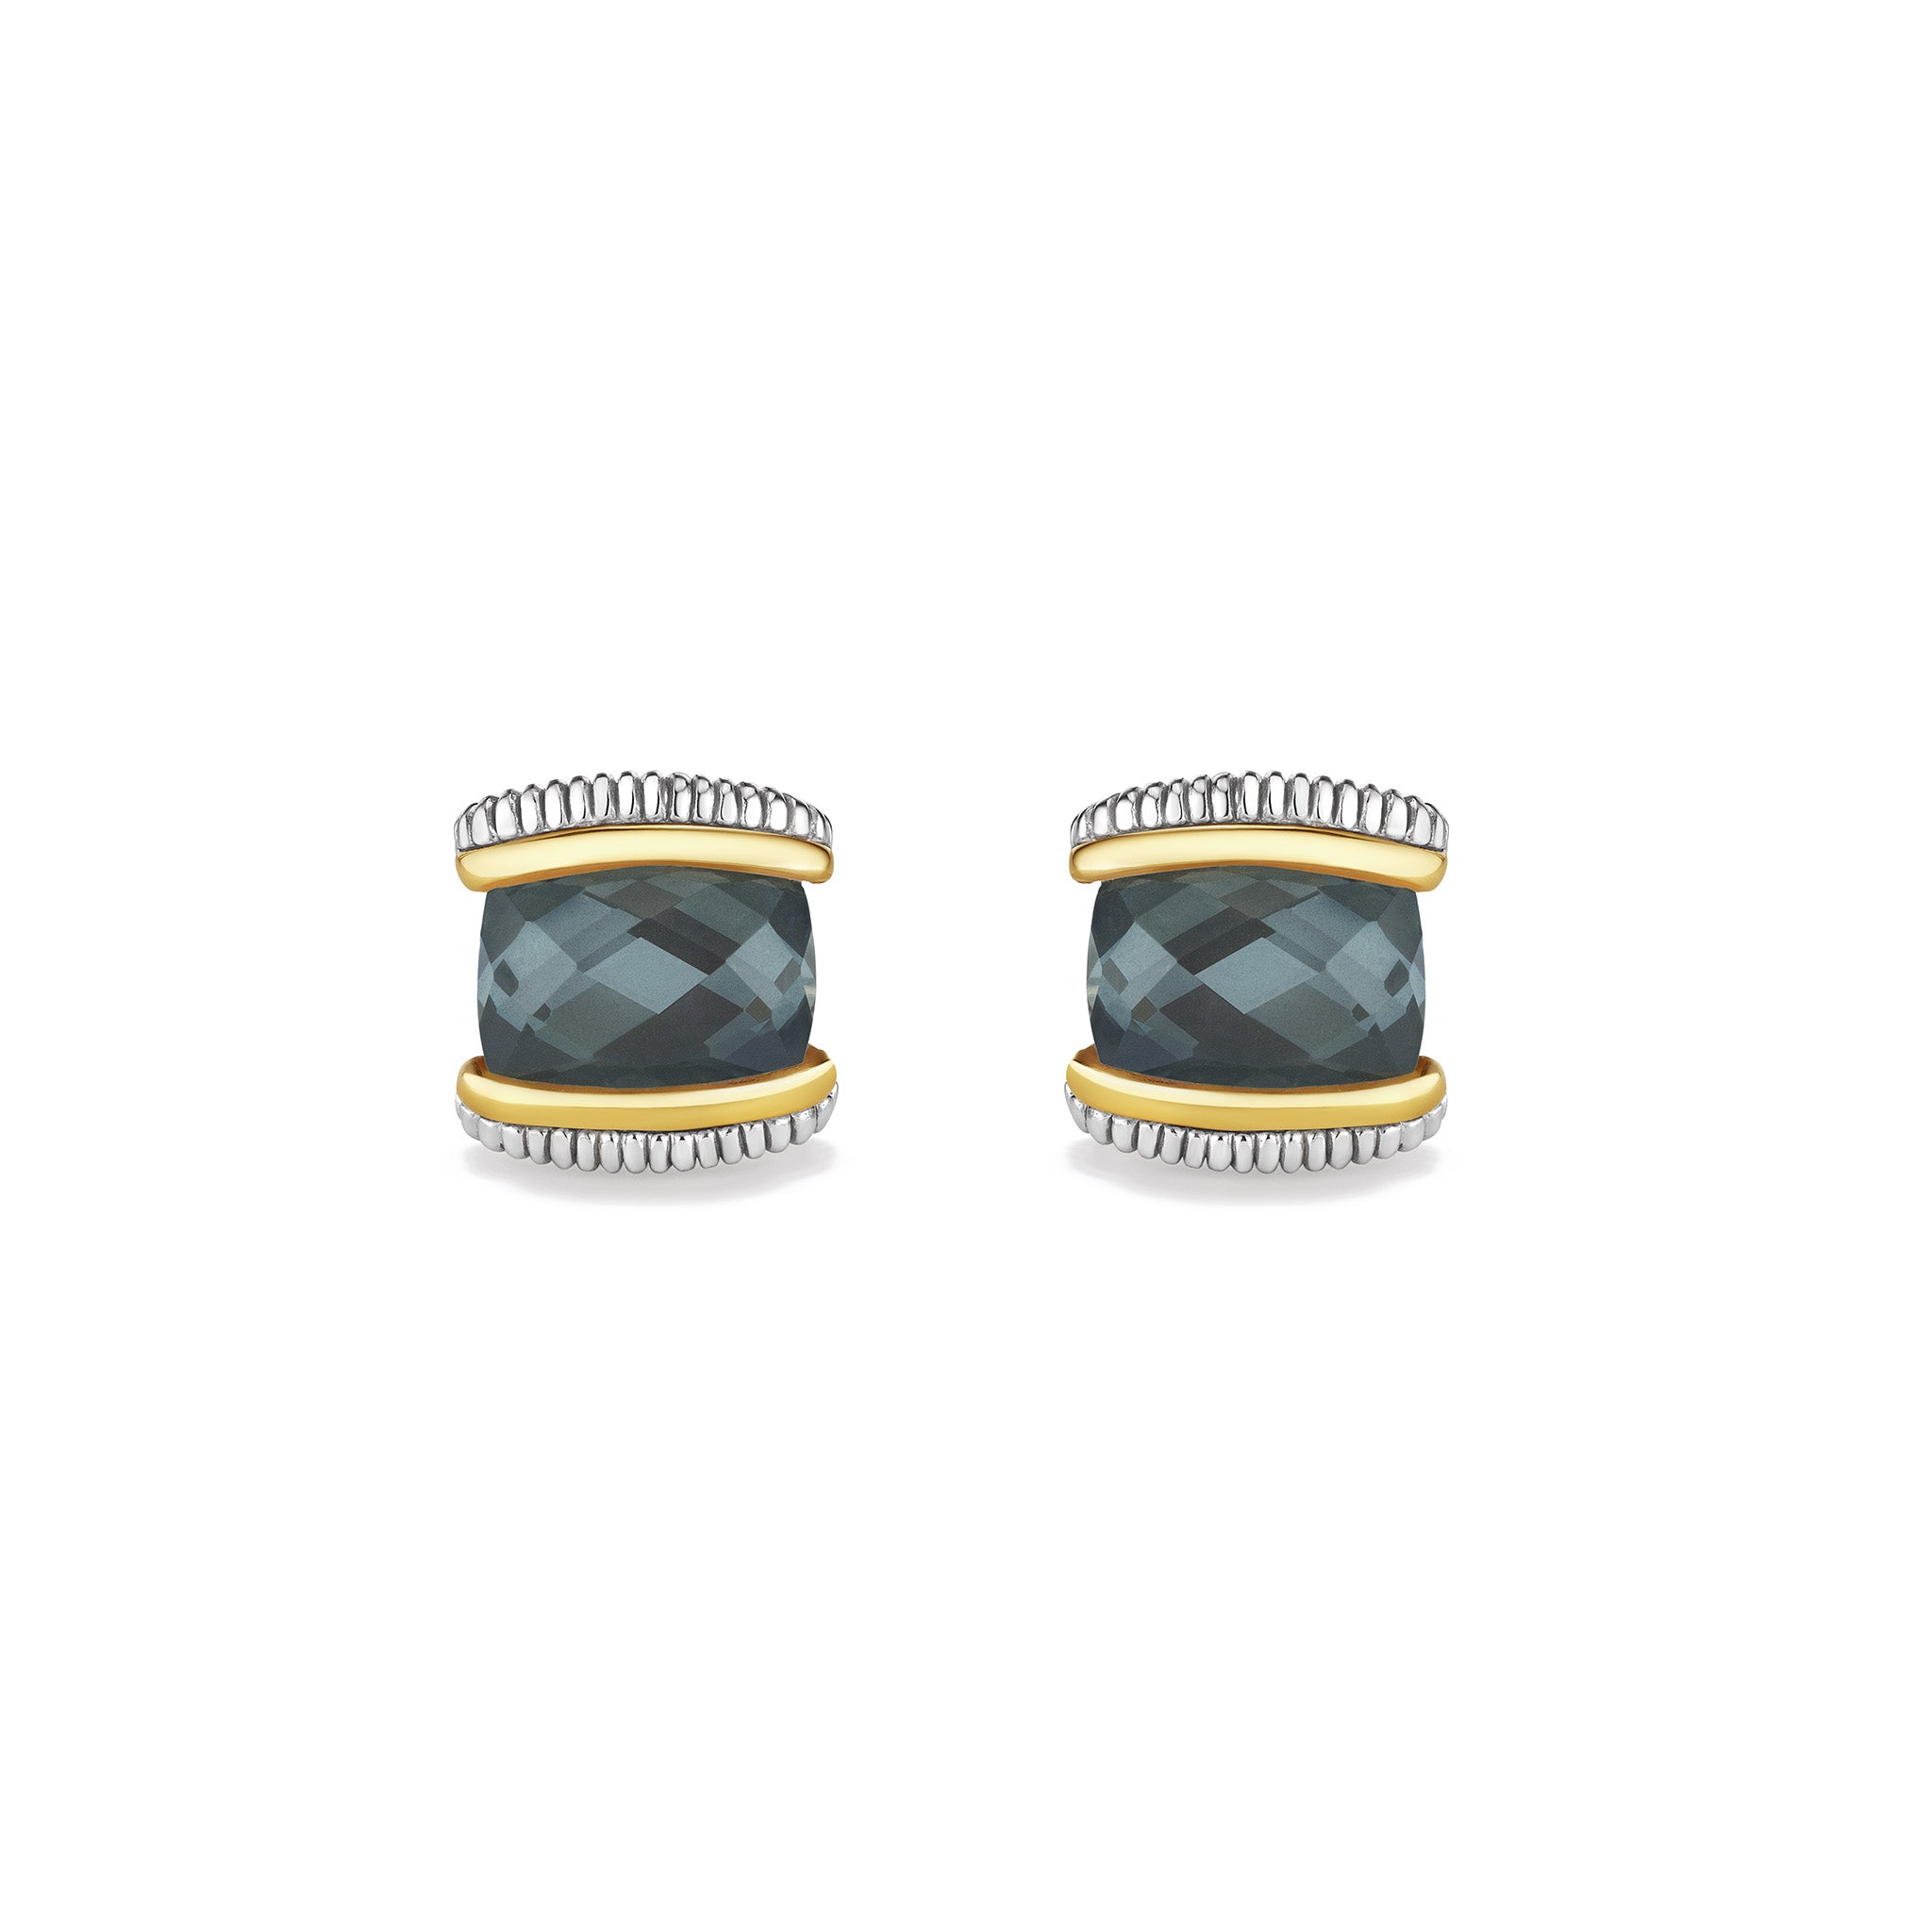 Eternity Stud Earrings with Blue Quartz over Hematite Doublet and 18K Gold